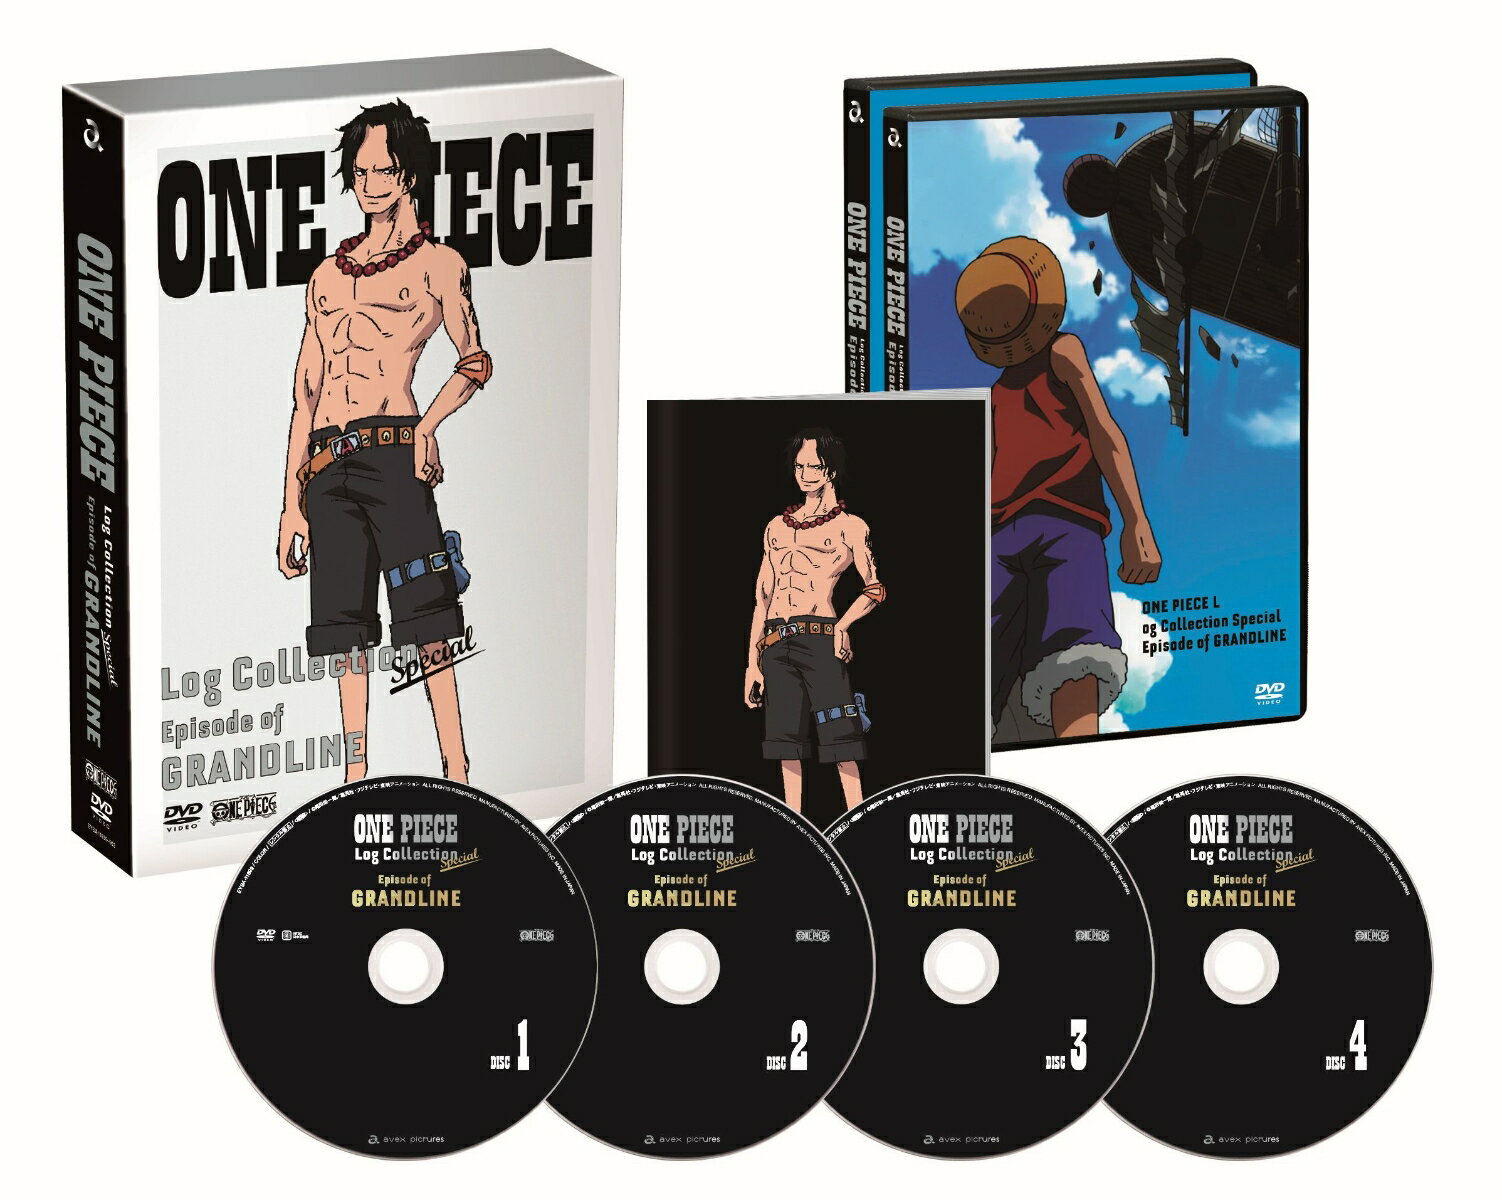 ONE PIECE Log Collection Special“Episode of GRANDLINE”